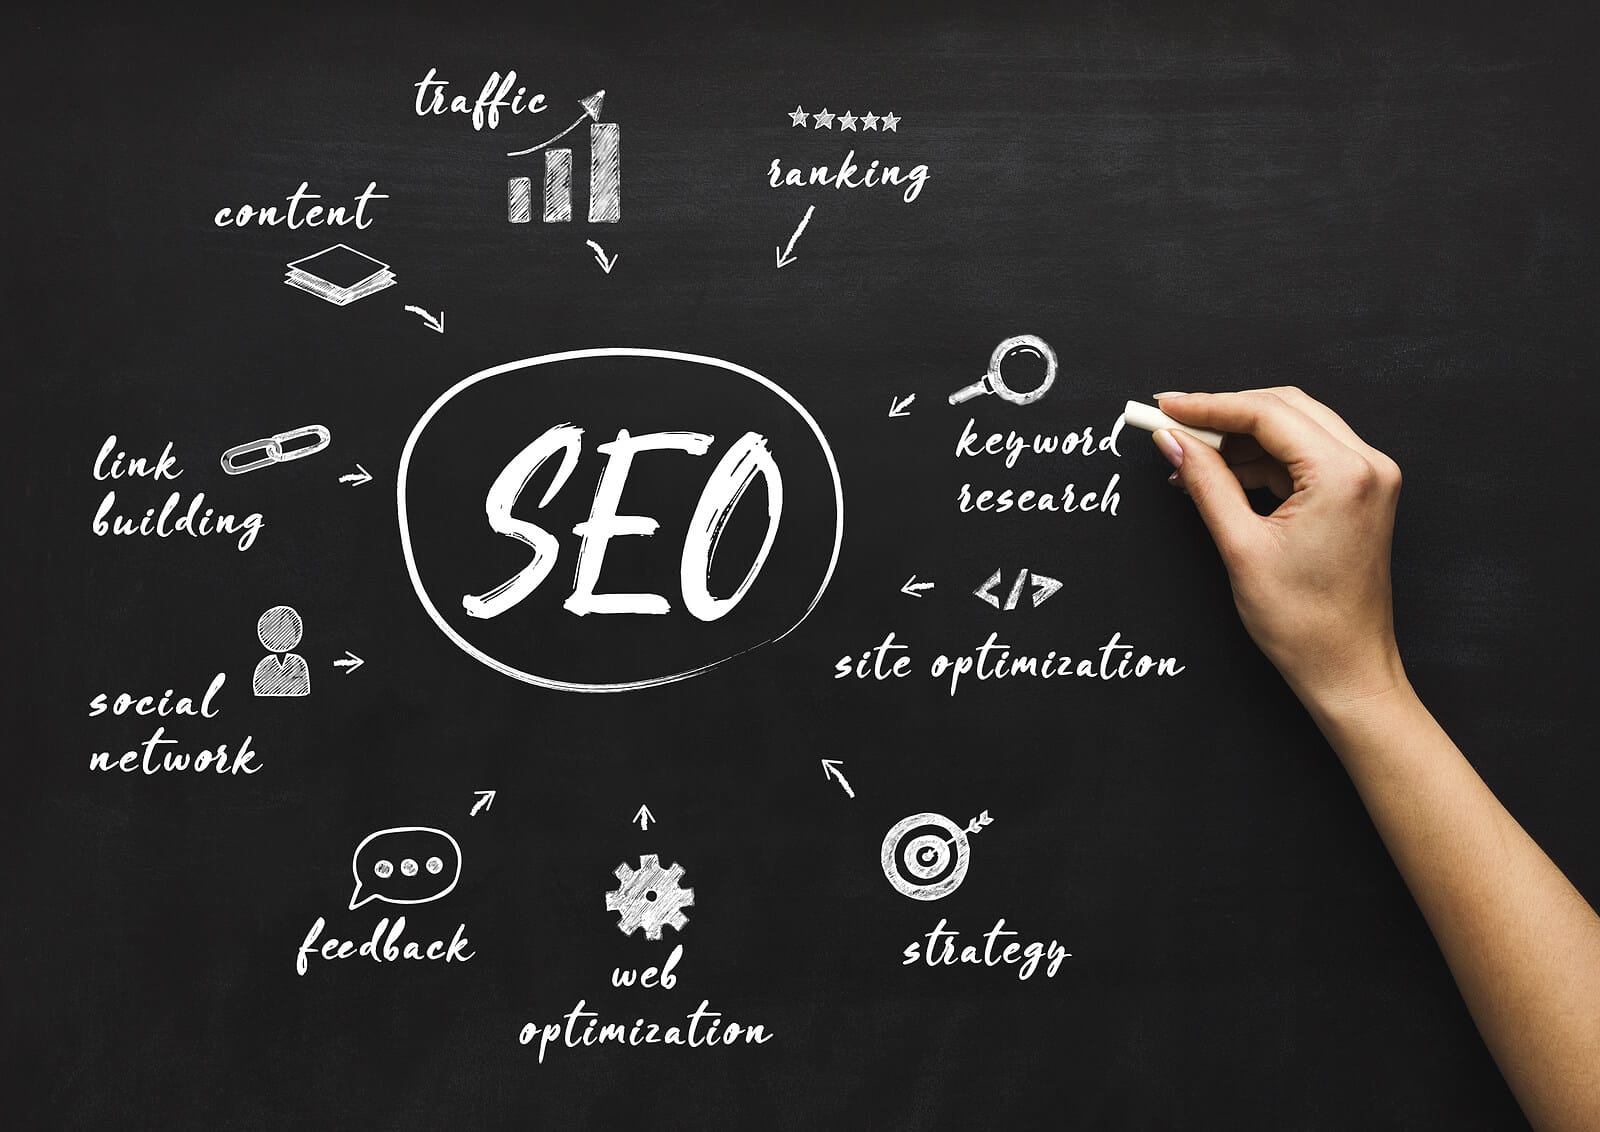 A hand writes SEO in a circle on a chalkboard. Looking to learn more about SEO and how it can help your business? Speak with a member of our team today to make the most out of your SEO.